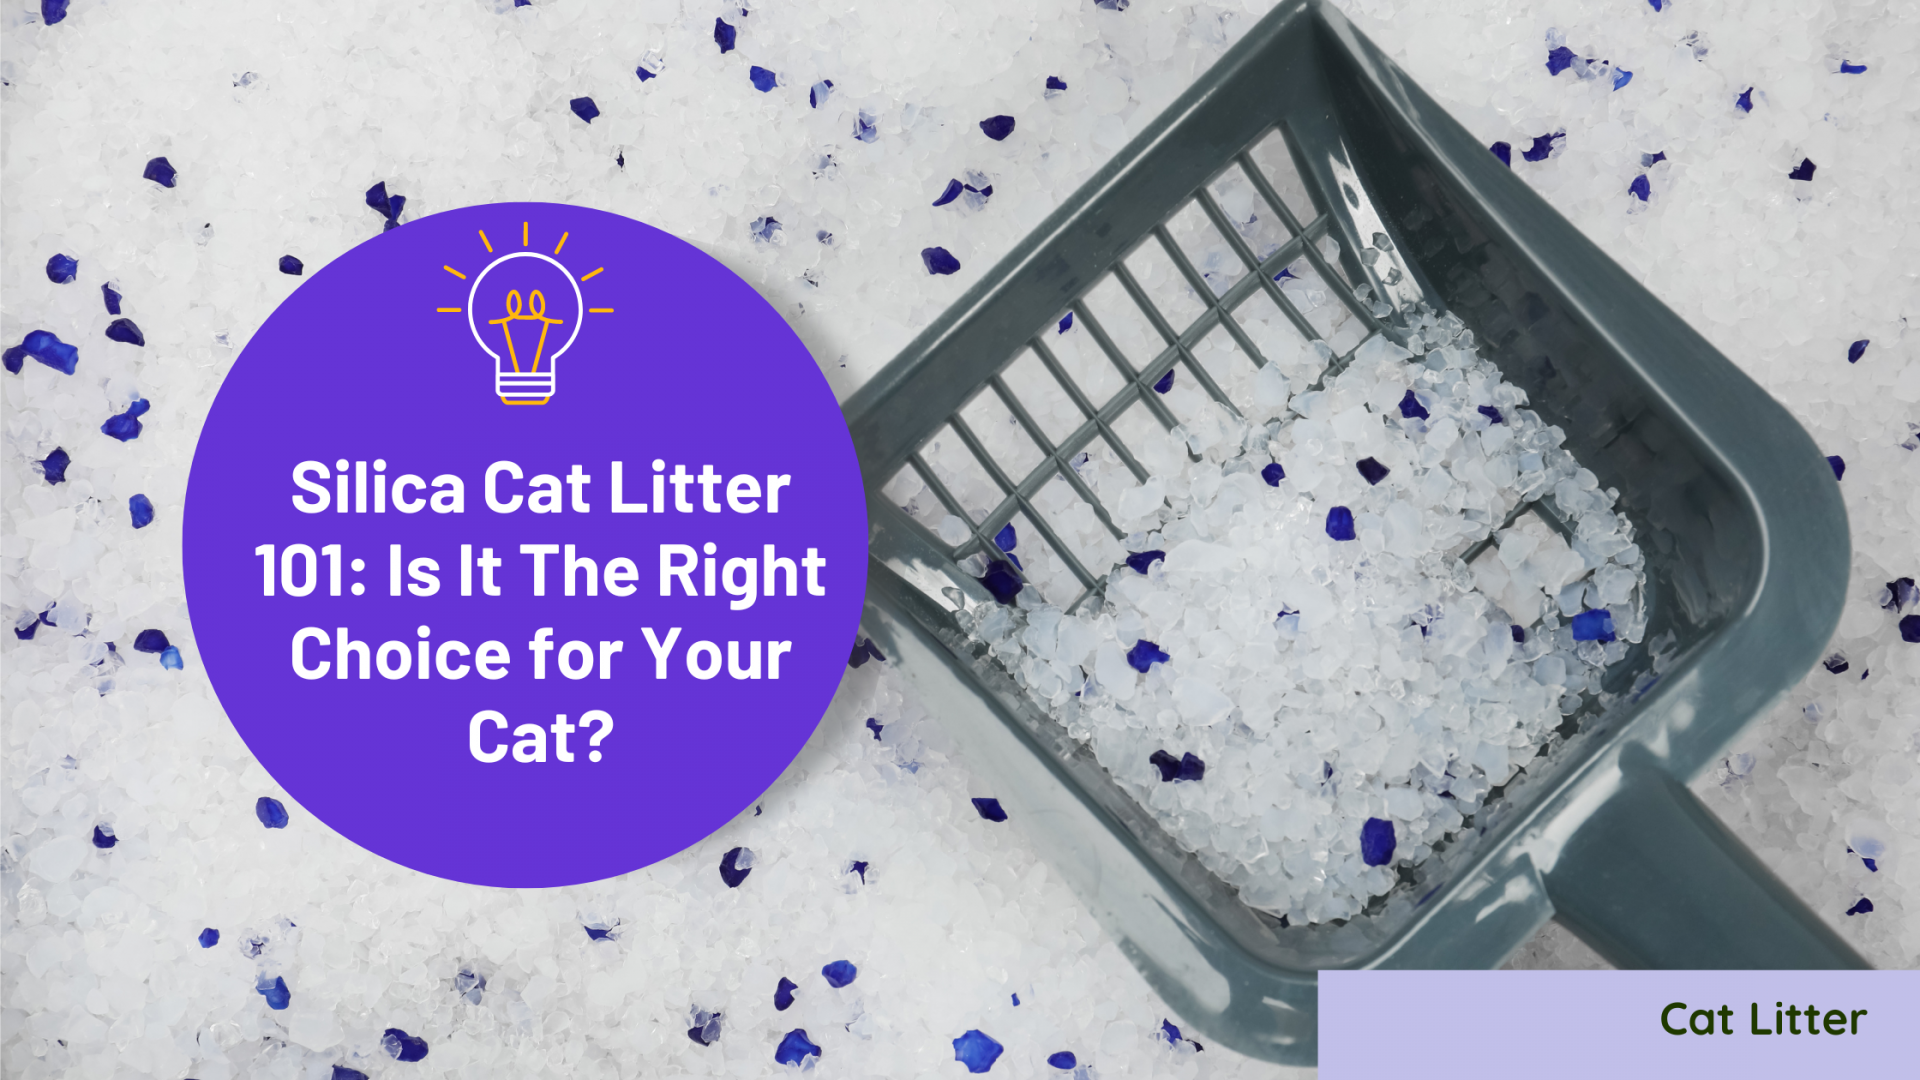 Silica Cat Litter 101 Is It The Right Choice for Your Cat